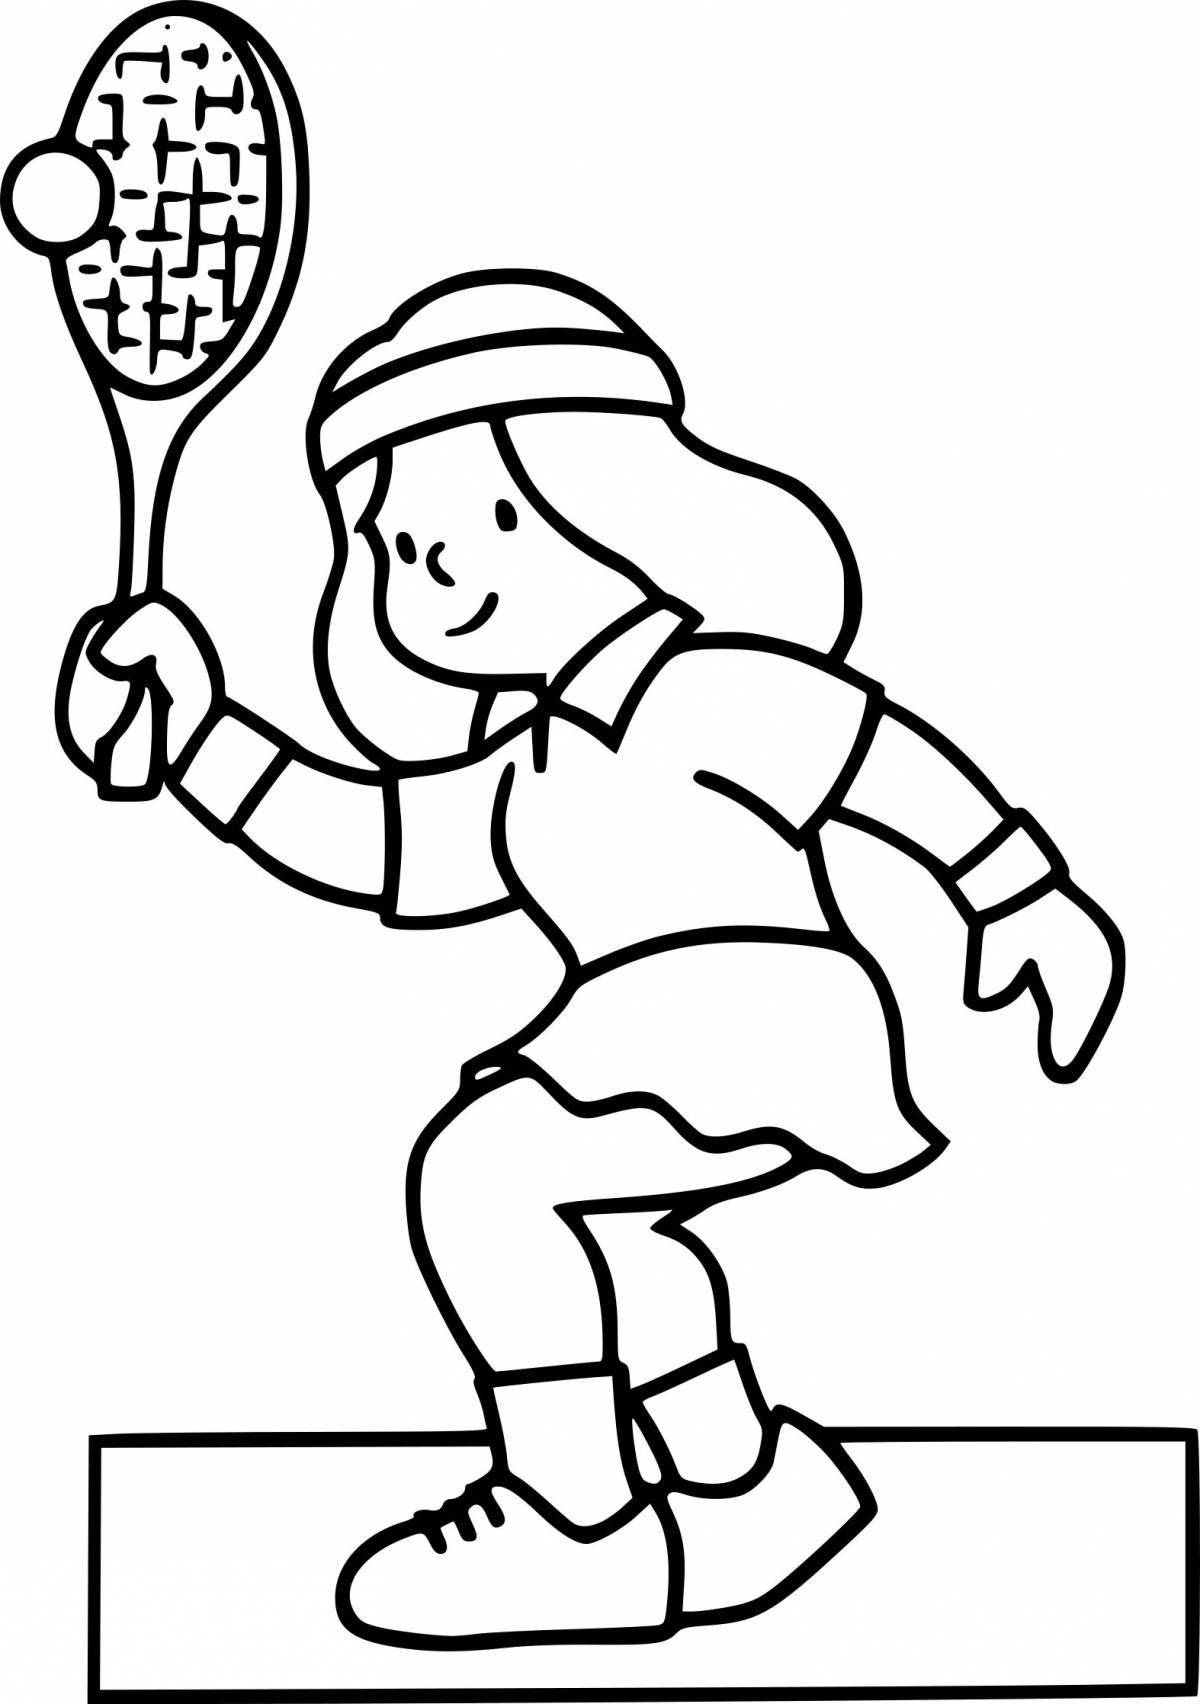 Fun coloring book athletes of different sports for children